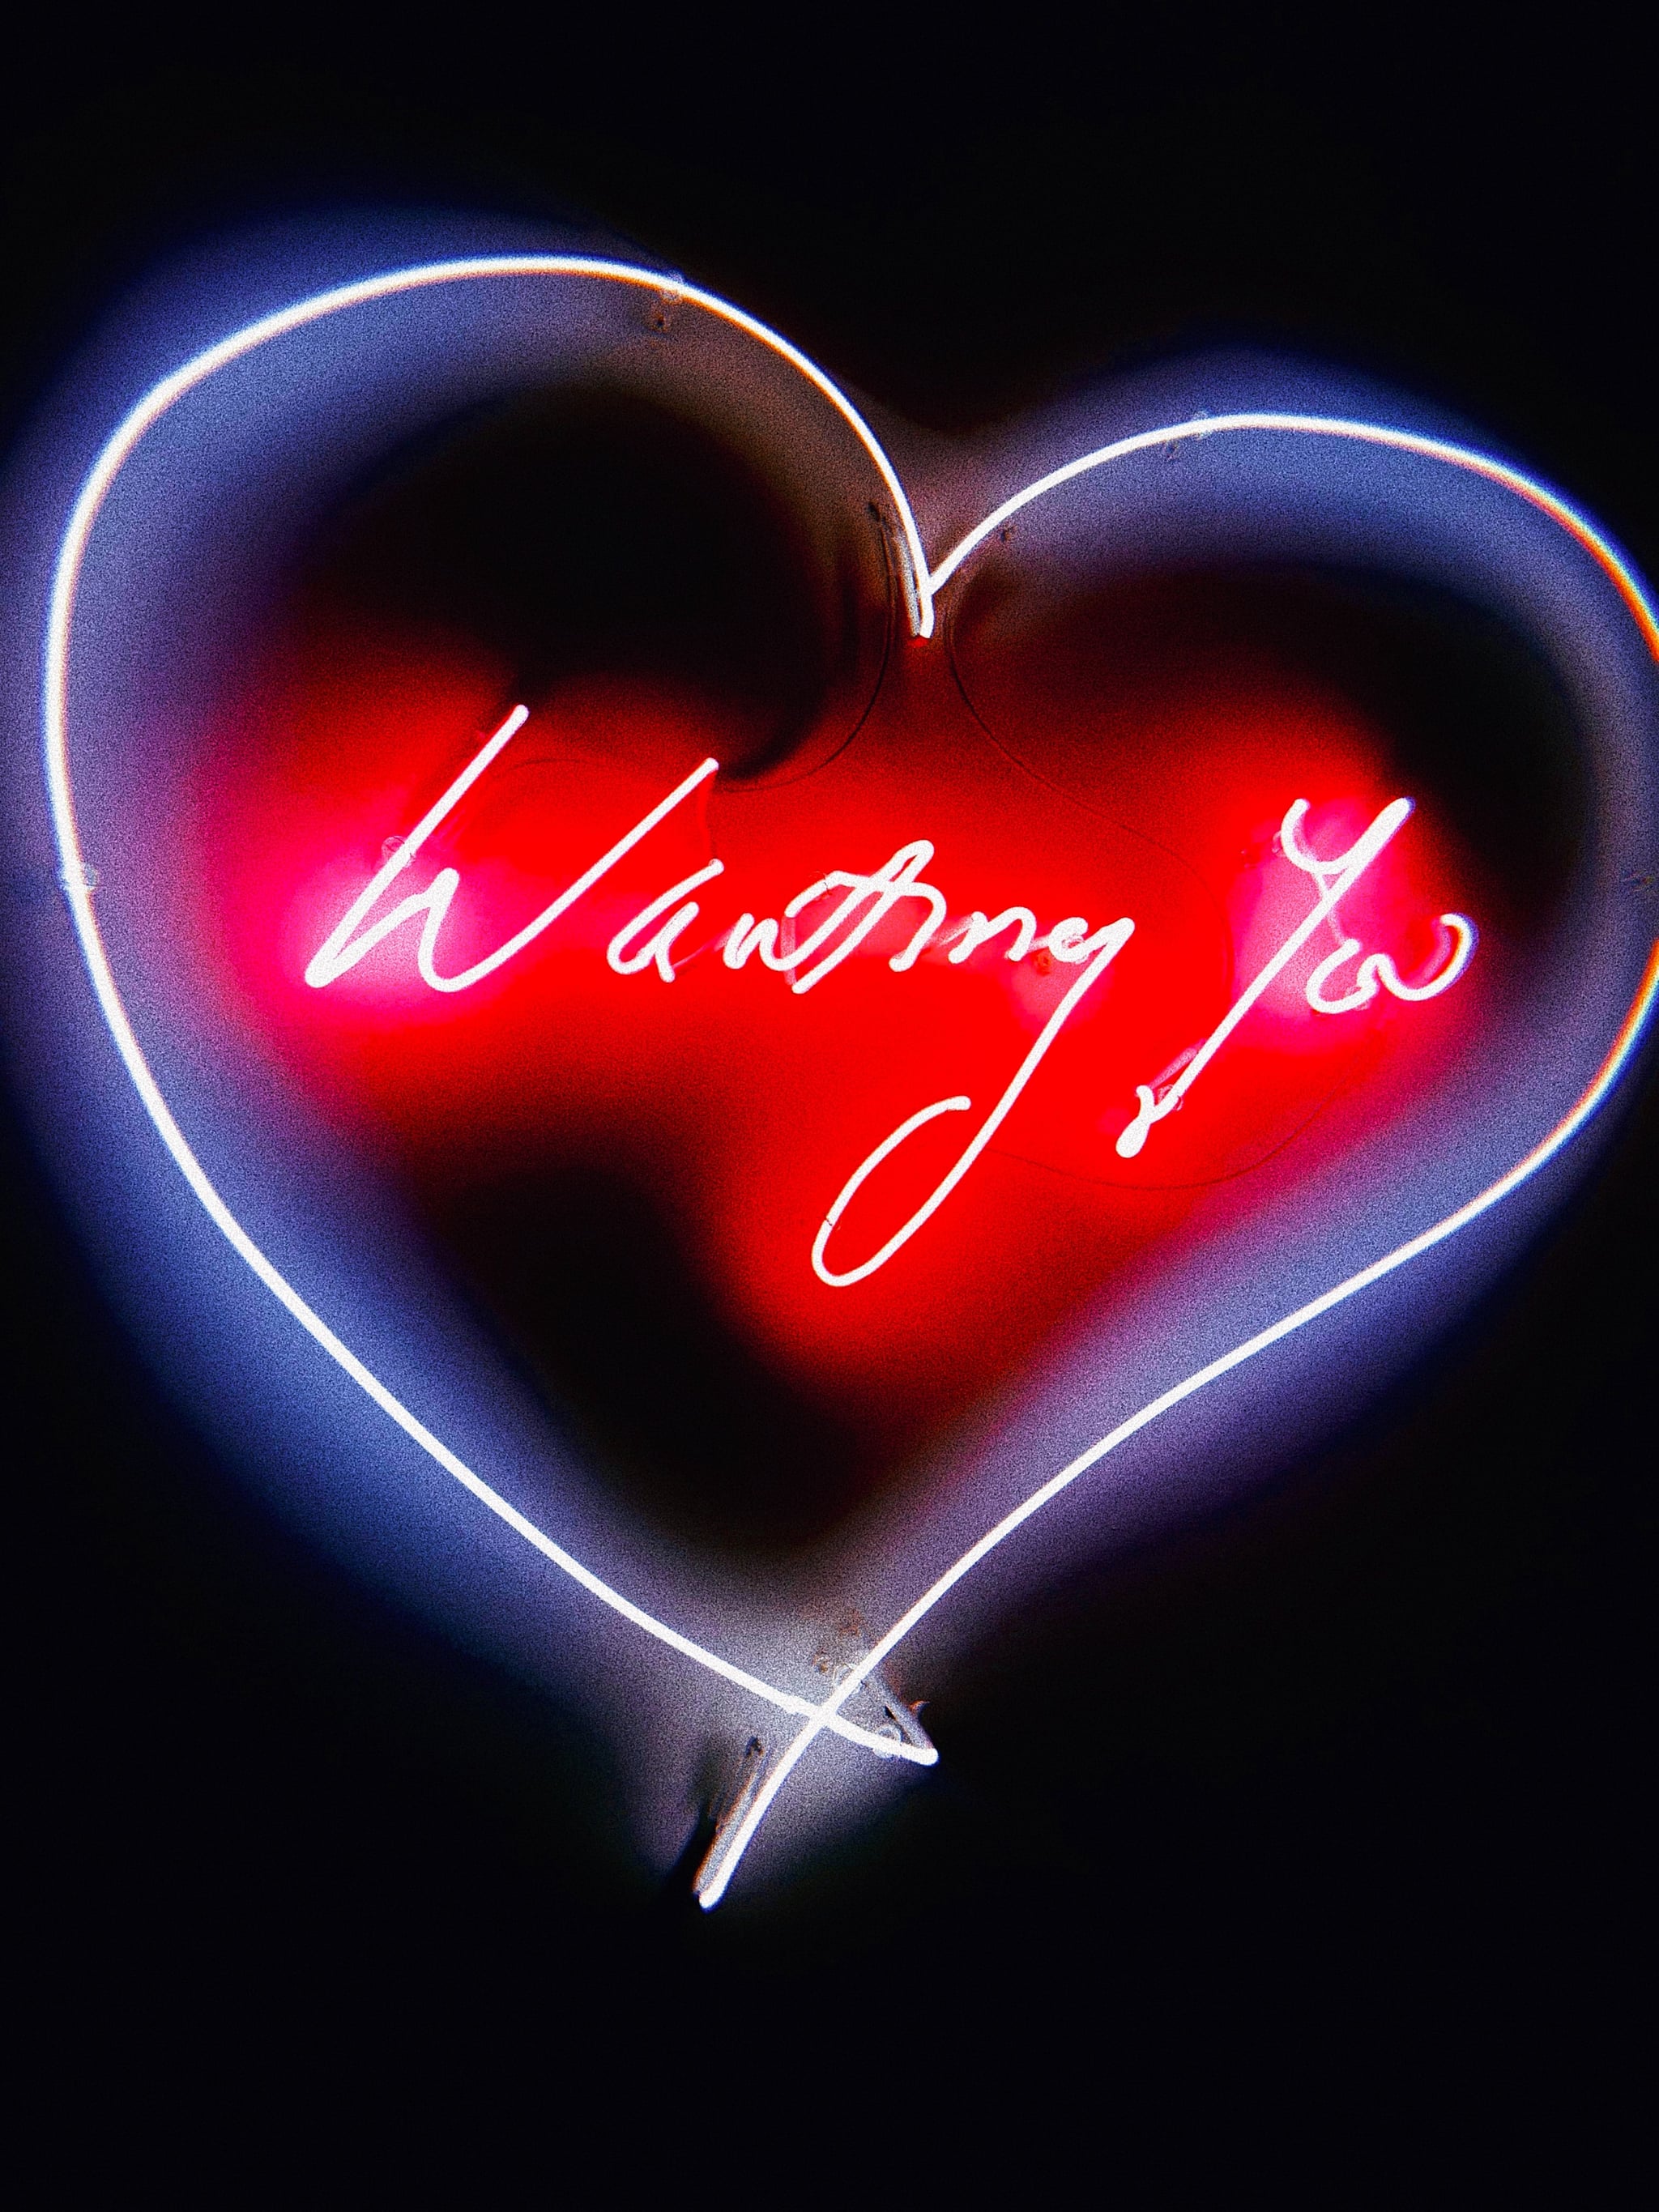 Valentines day wallpaper wanting you neon sign the dreamiest iphone wallpapers for valentines day that fit any aesthetic tech photo